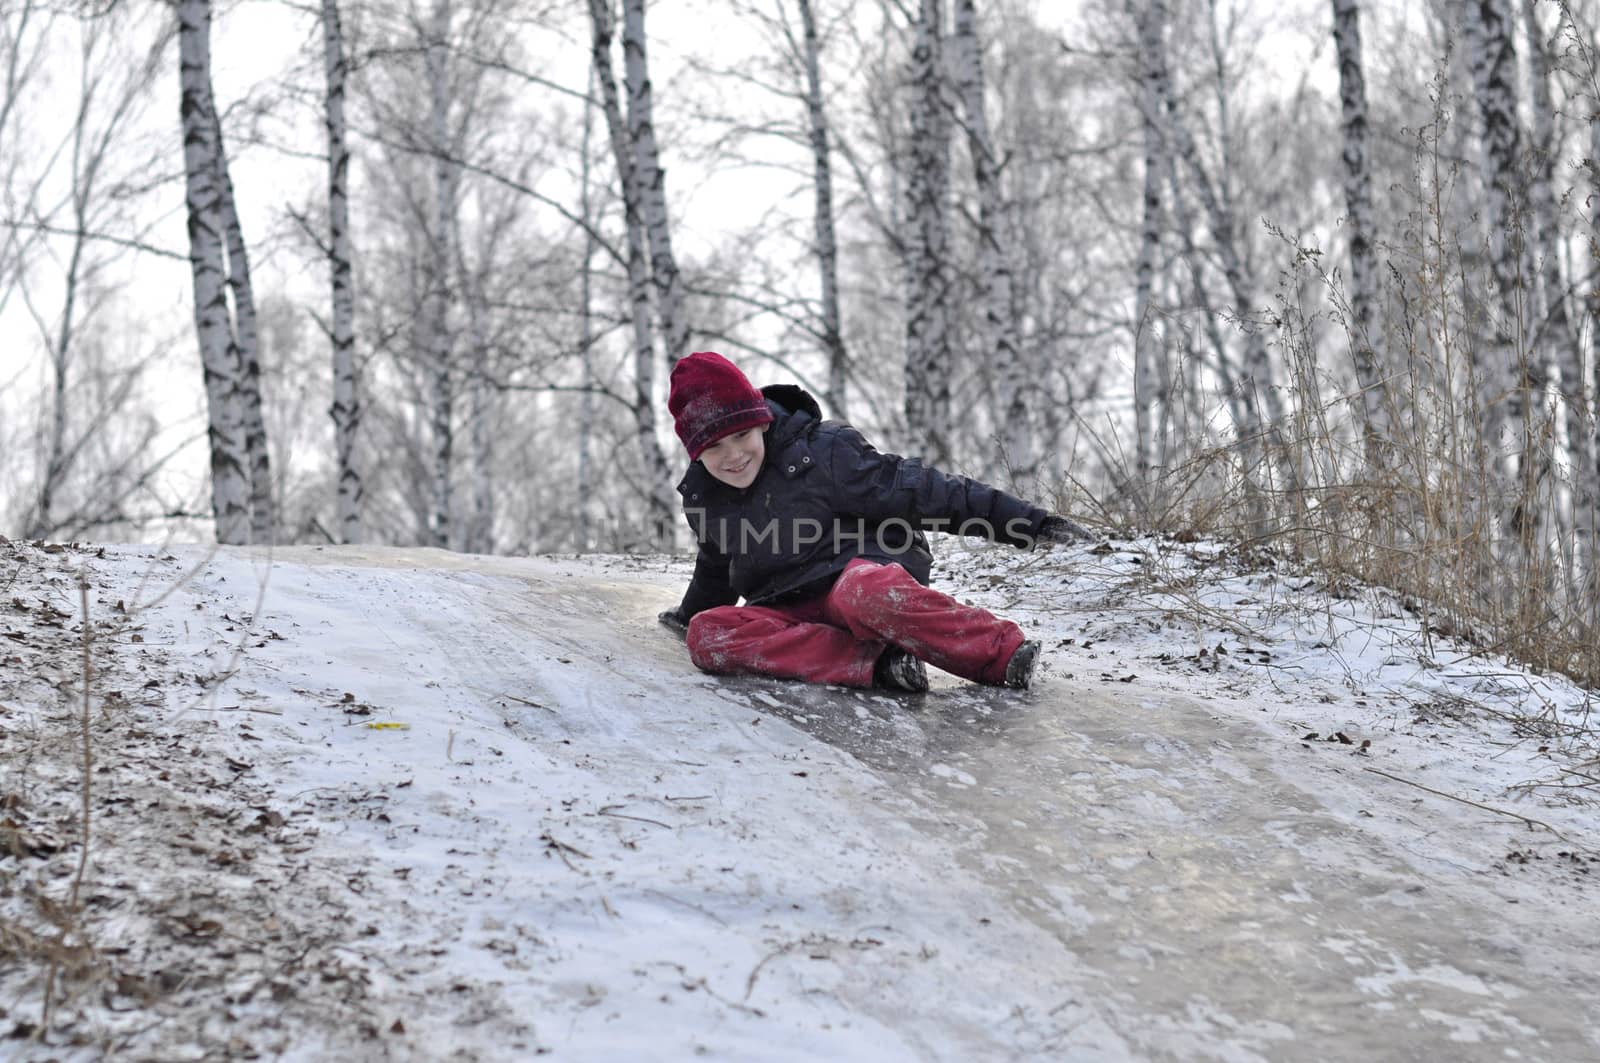 the teenage boy rides from a hill in the snow-covered wood